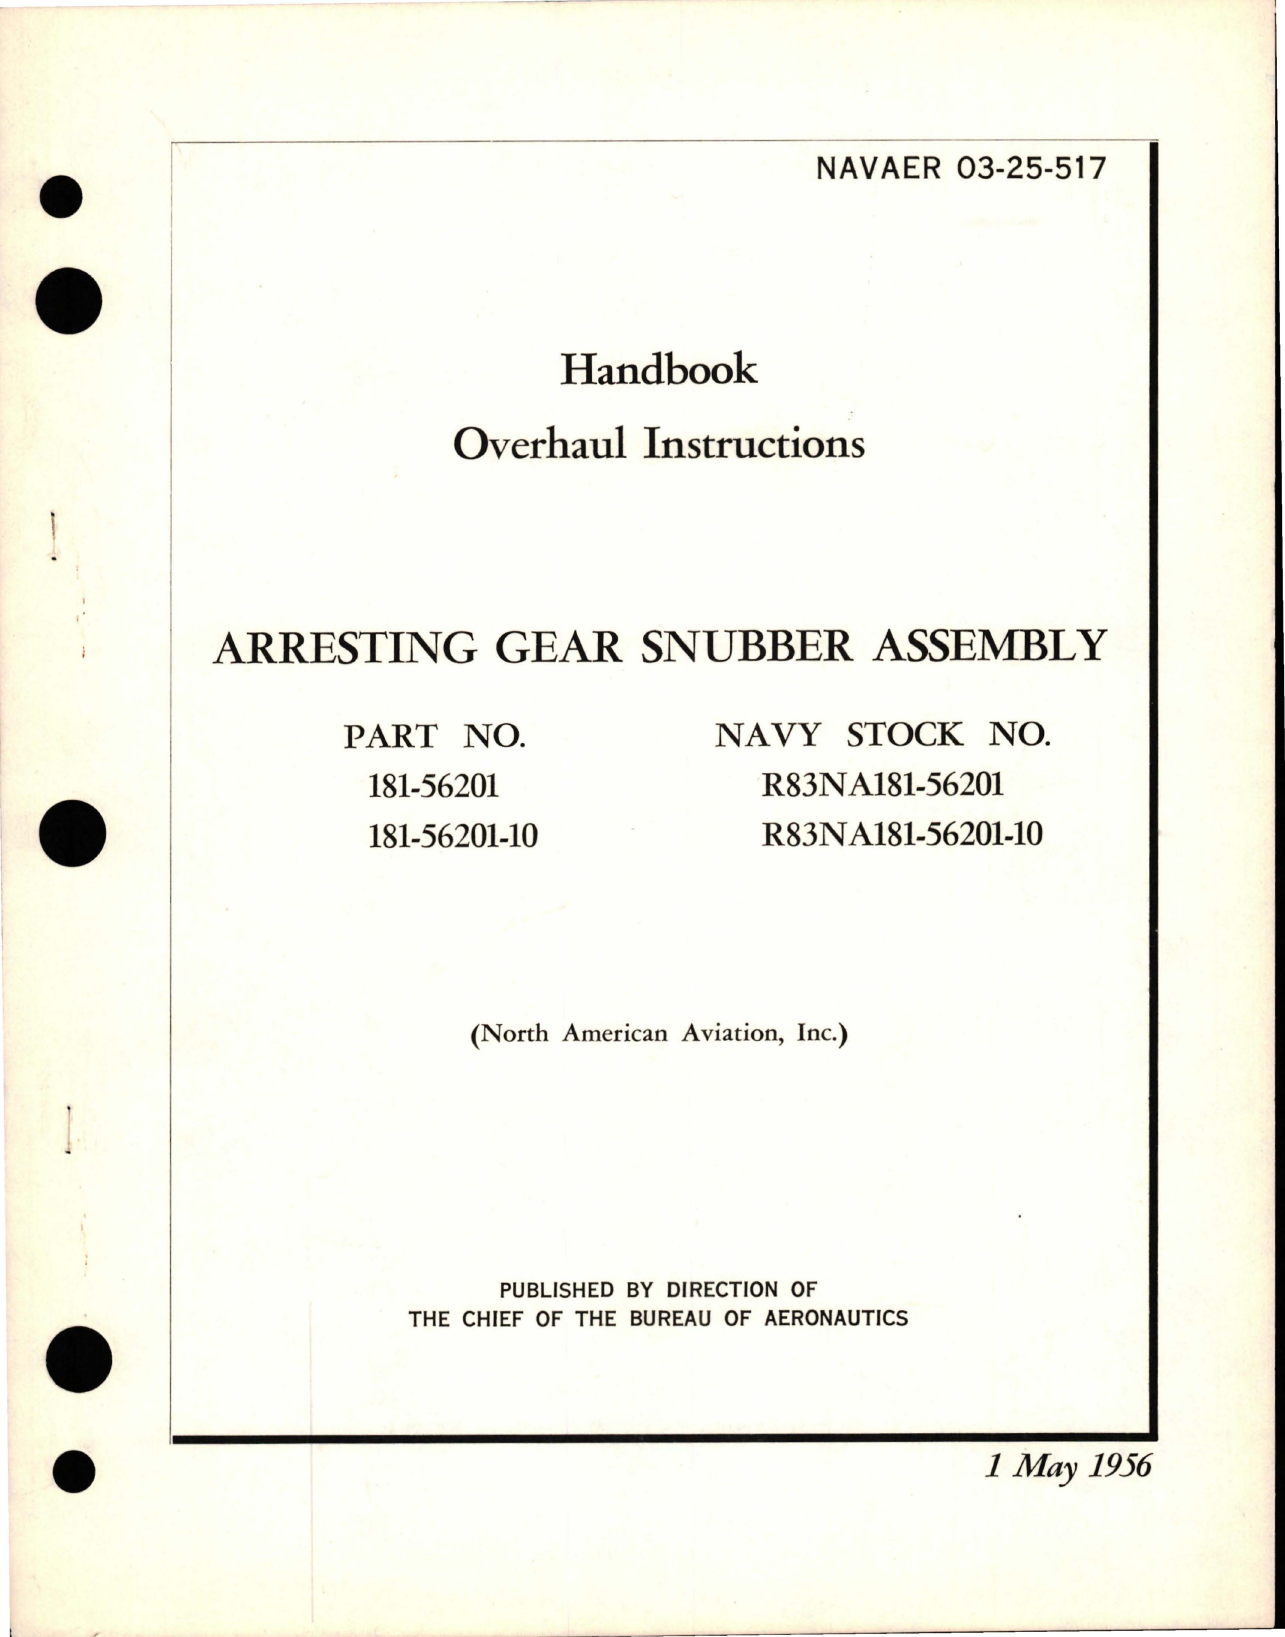 Sample page 1 from AirCorps Library document: Overhaul Instructions for Arresting Gear Snubber Assembly - Part 181-56201 and 181-56201-10 